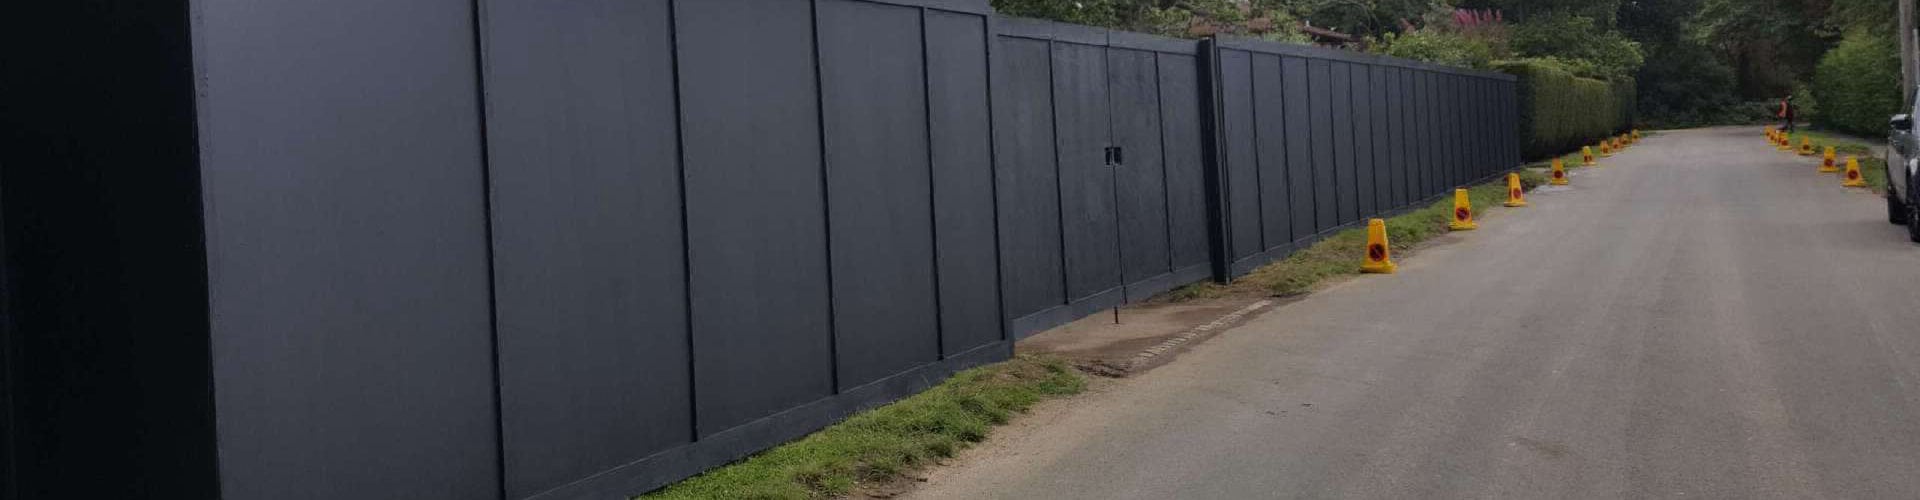 We Provide Site Hoarding, Security Fencing and Acoustic Close Board.